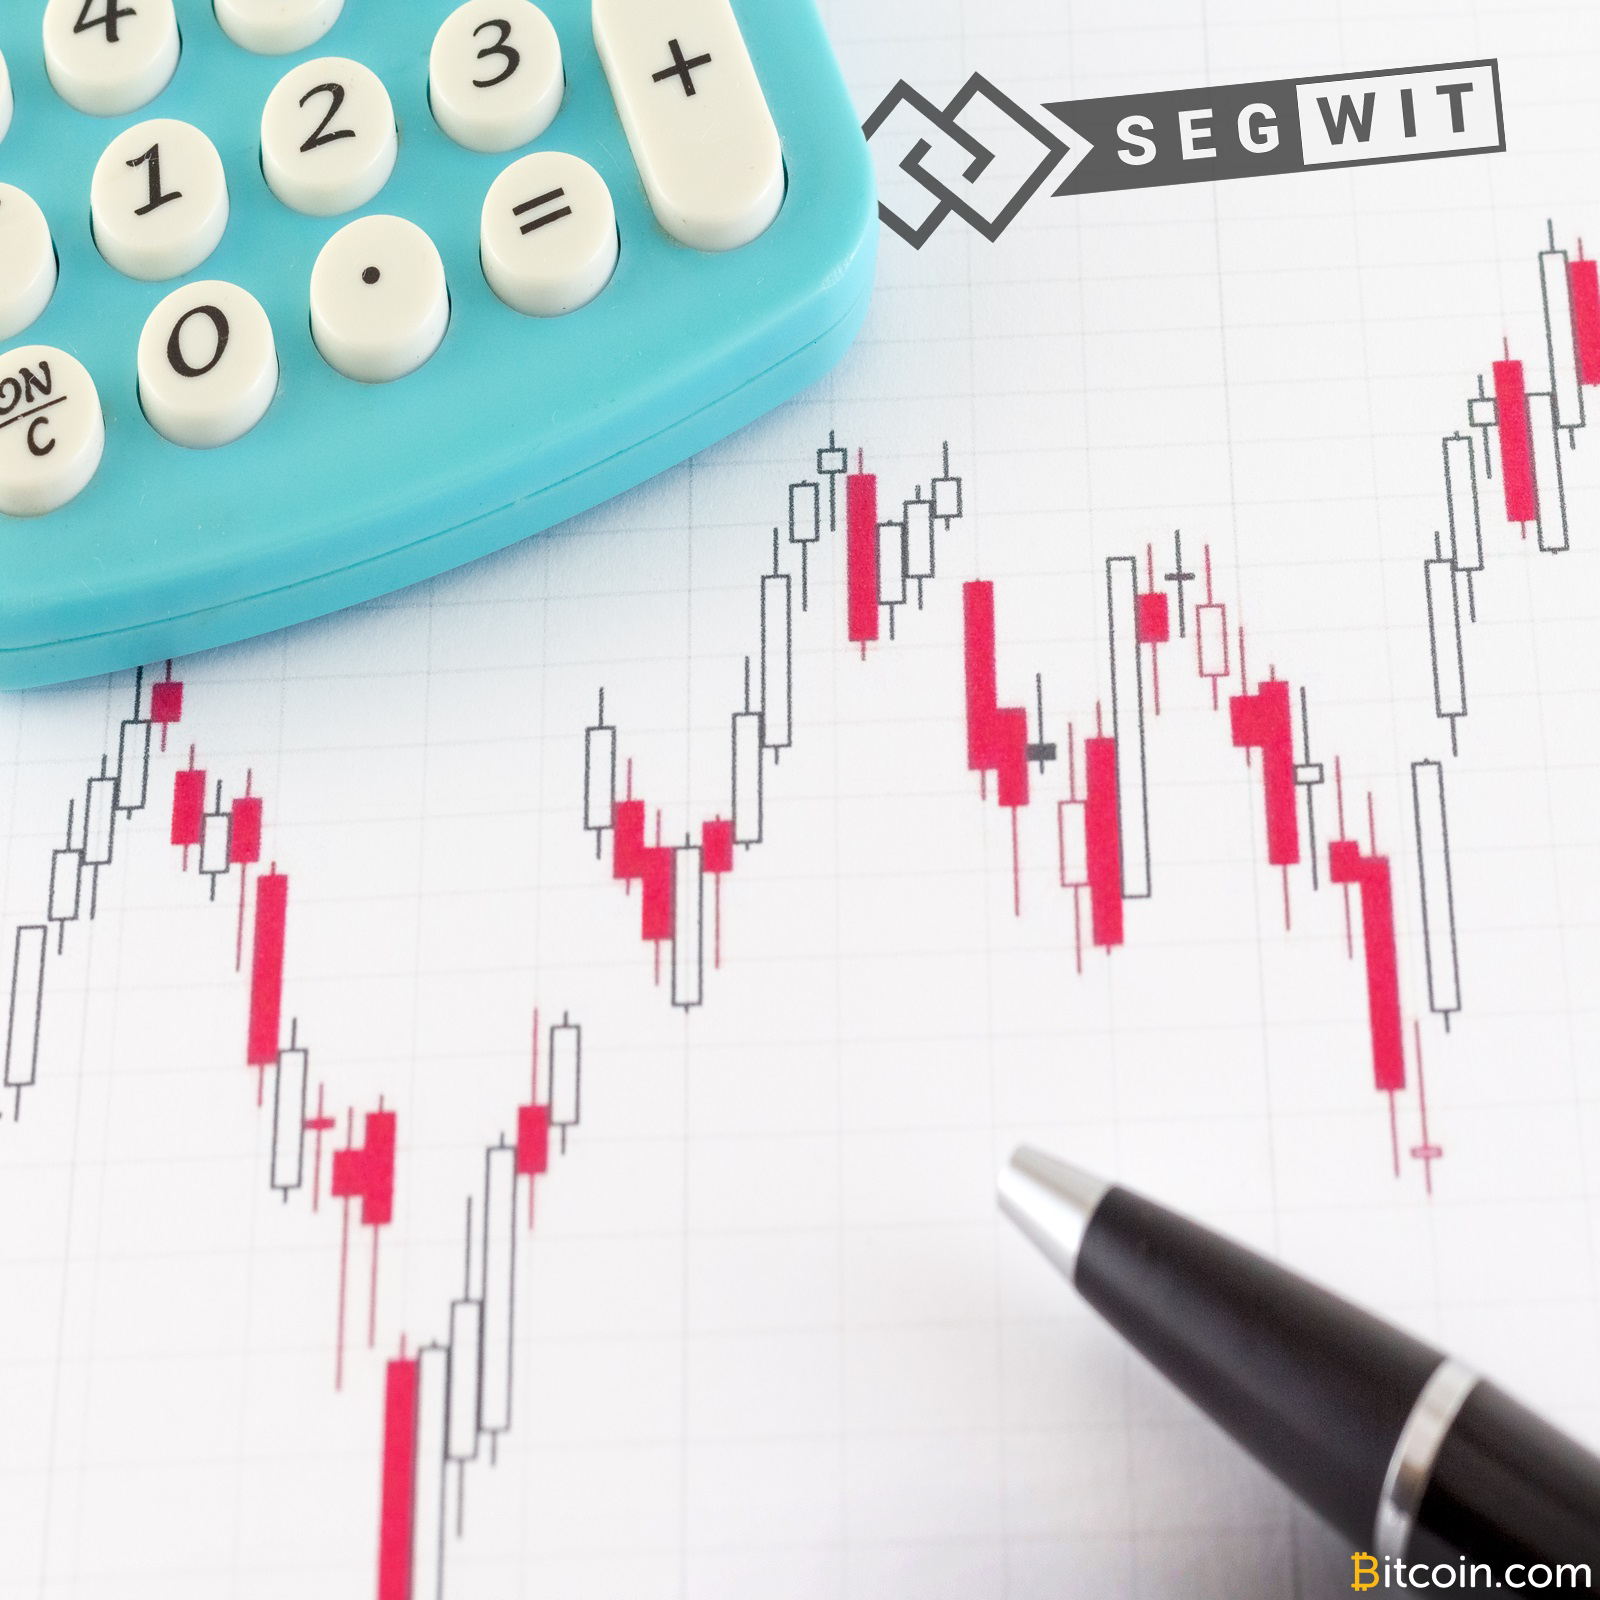 Markets Update: Bitcoin Price Pushes Forward After Segwit Activation